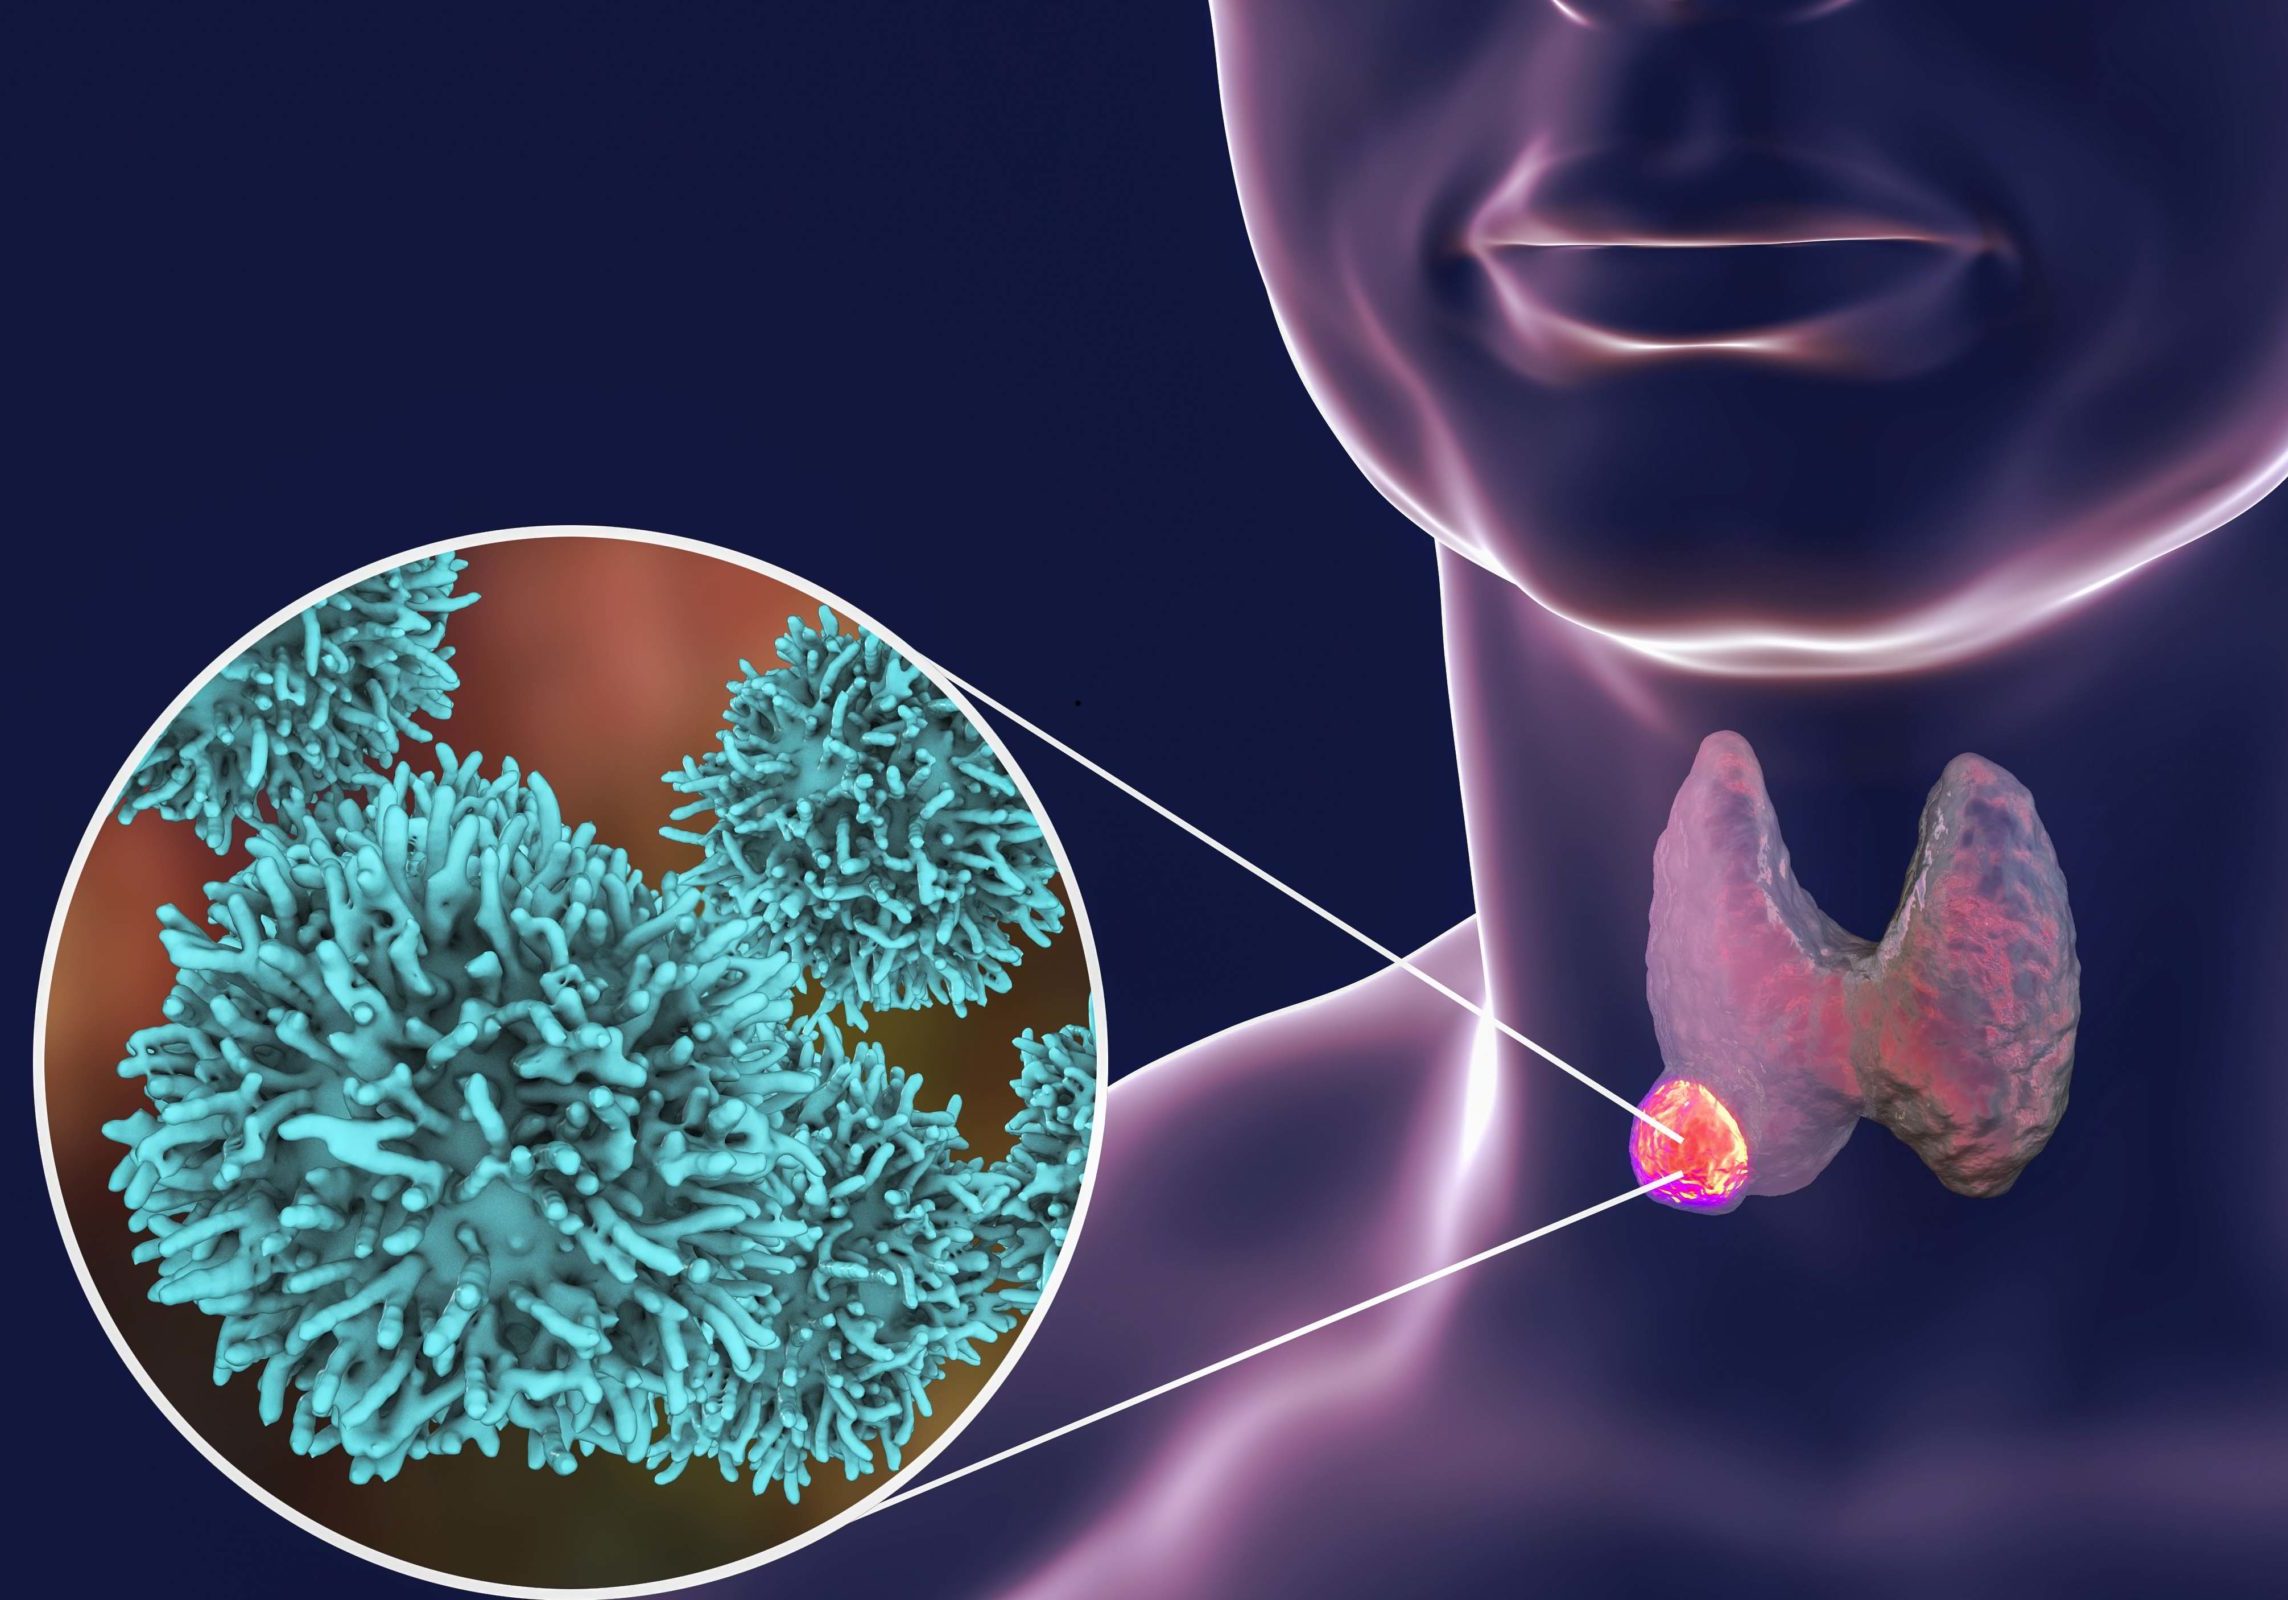 Thyroid cancer. 3D illustration showing thyroid gland with tumor inside human body and closeup view of thyroid cancer cells